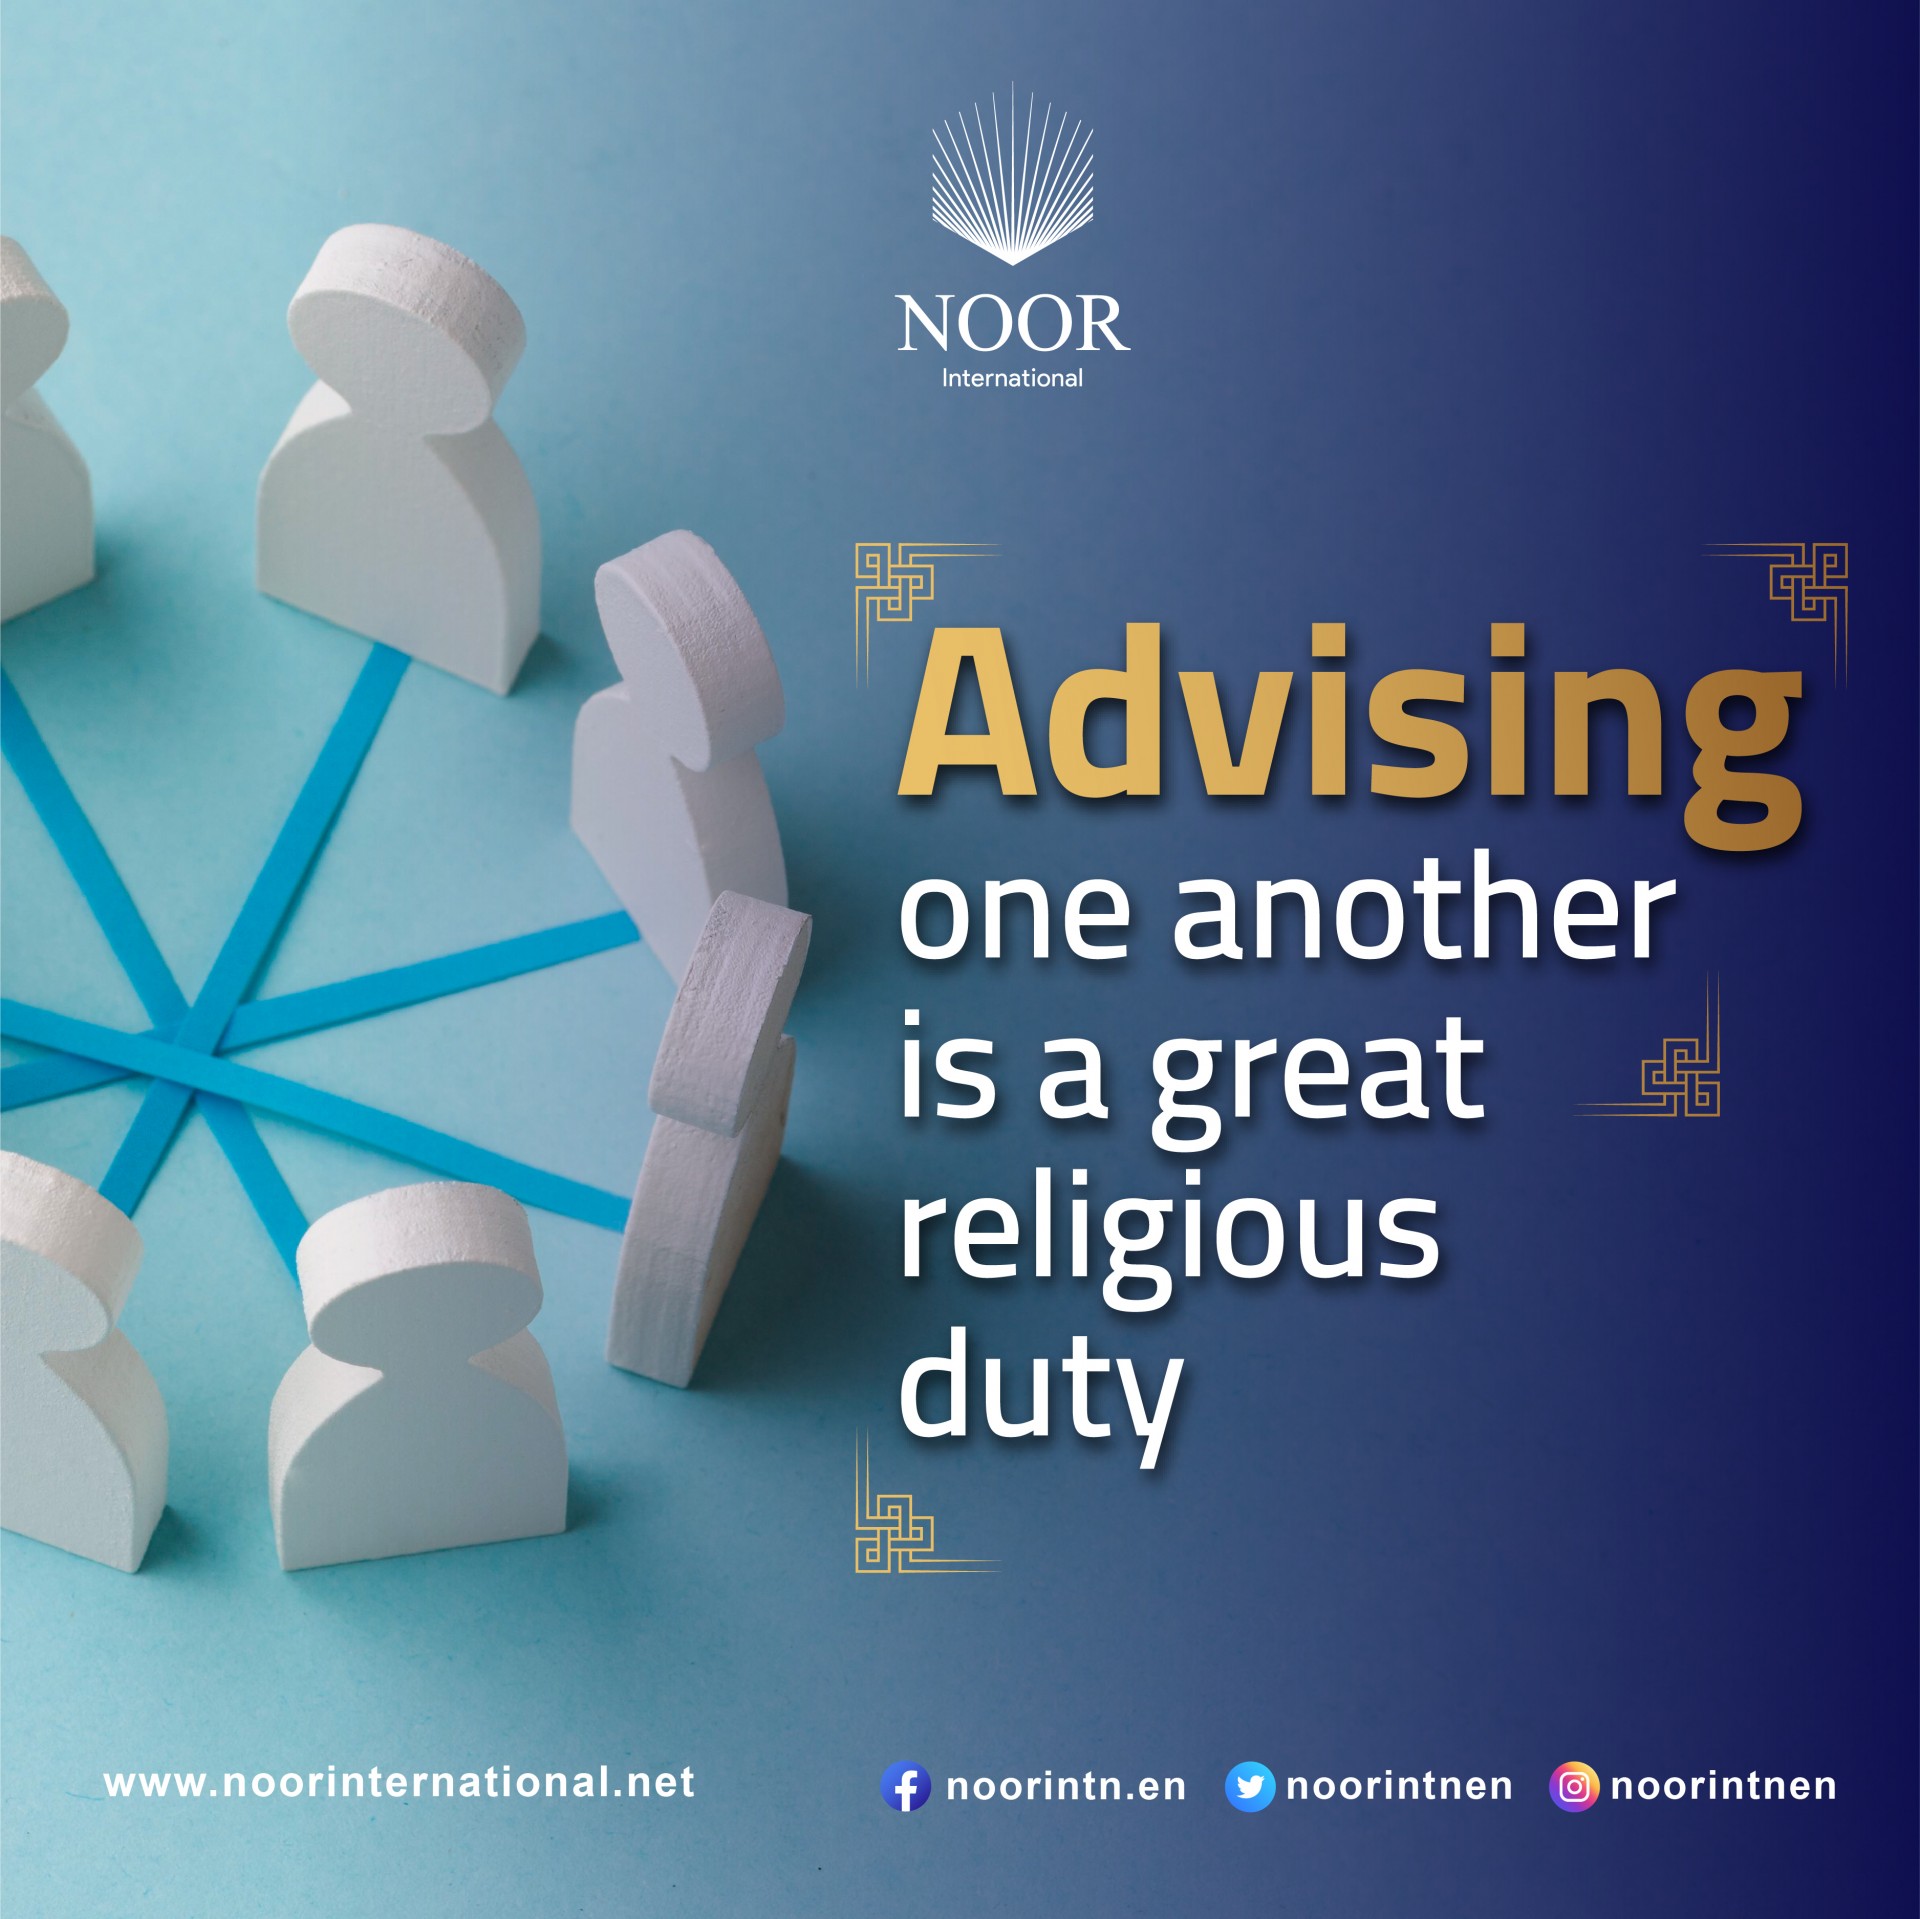 Advising one another is a great religious duty